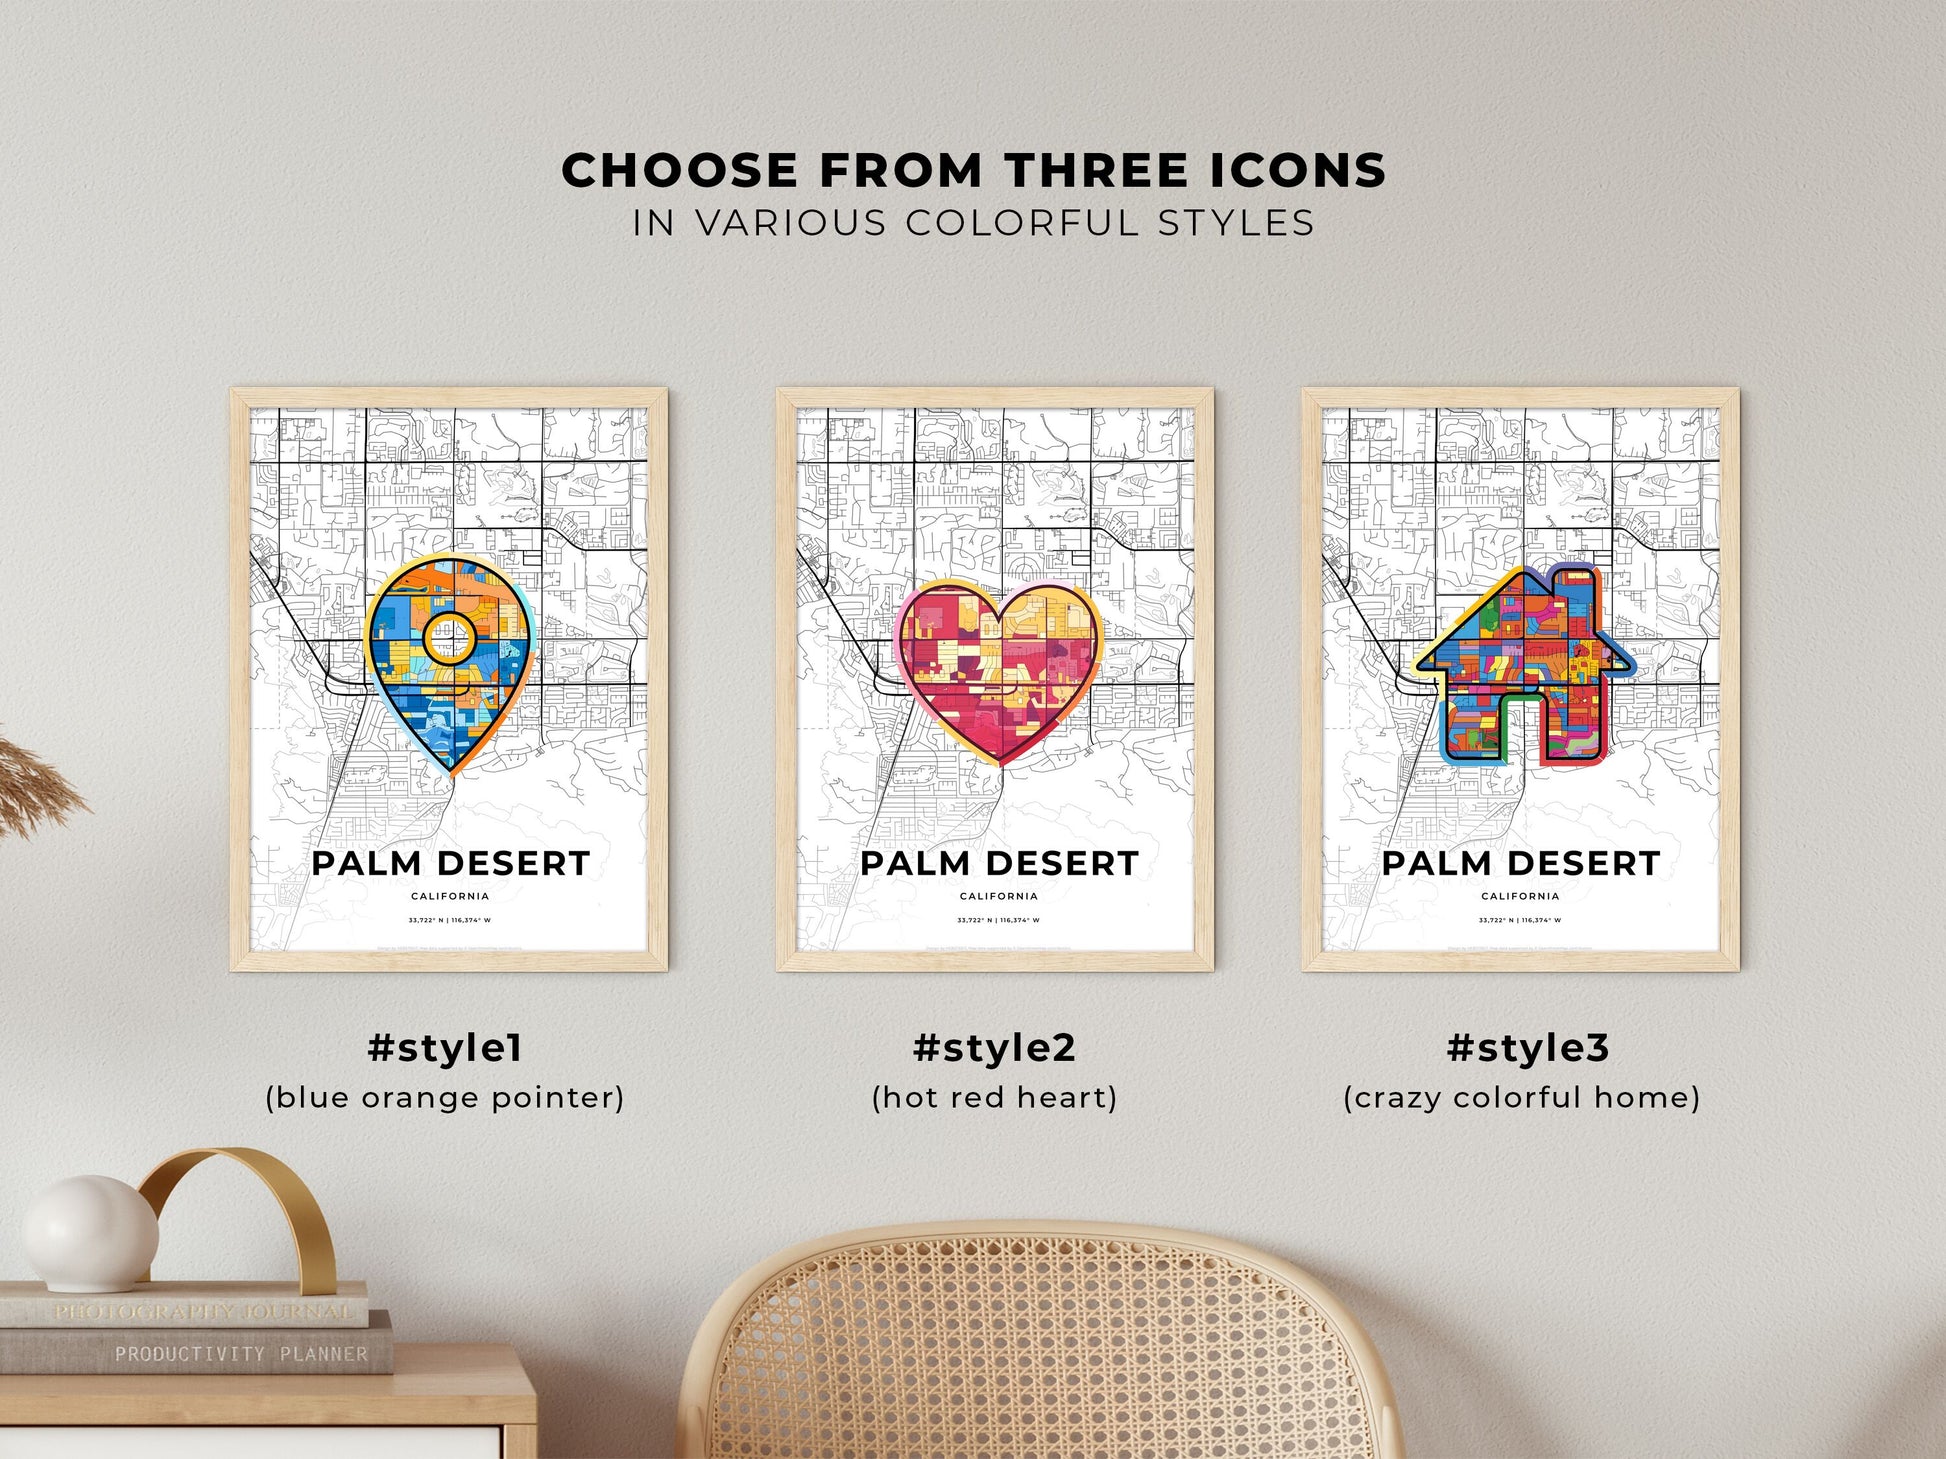 PALM DESERT CALIFORNIA minimal art map with a colorful icon.